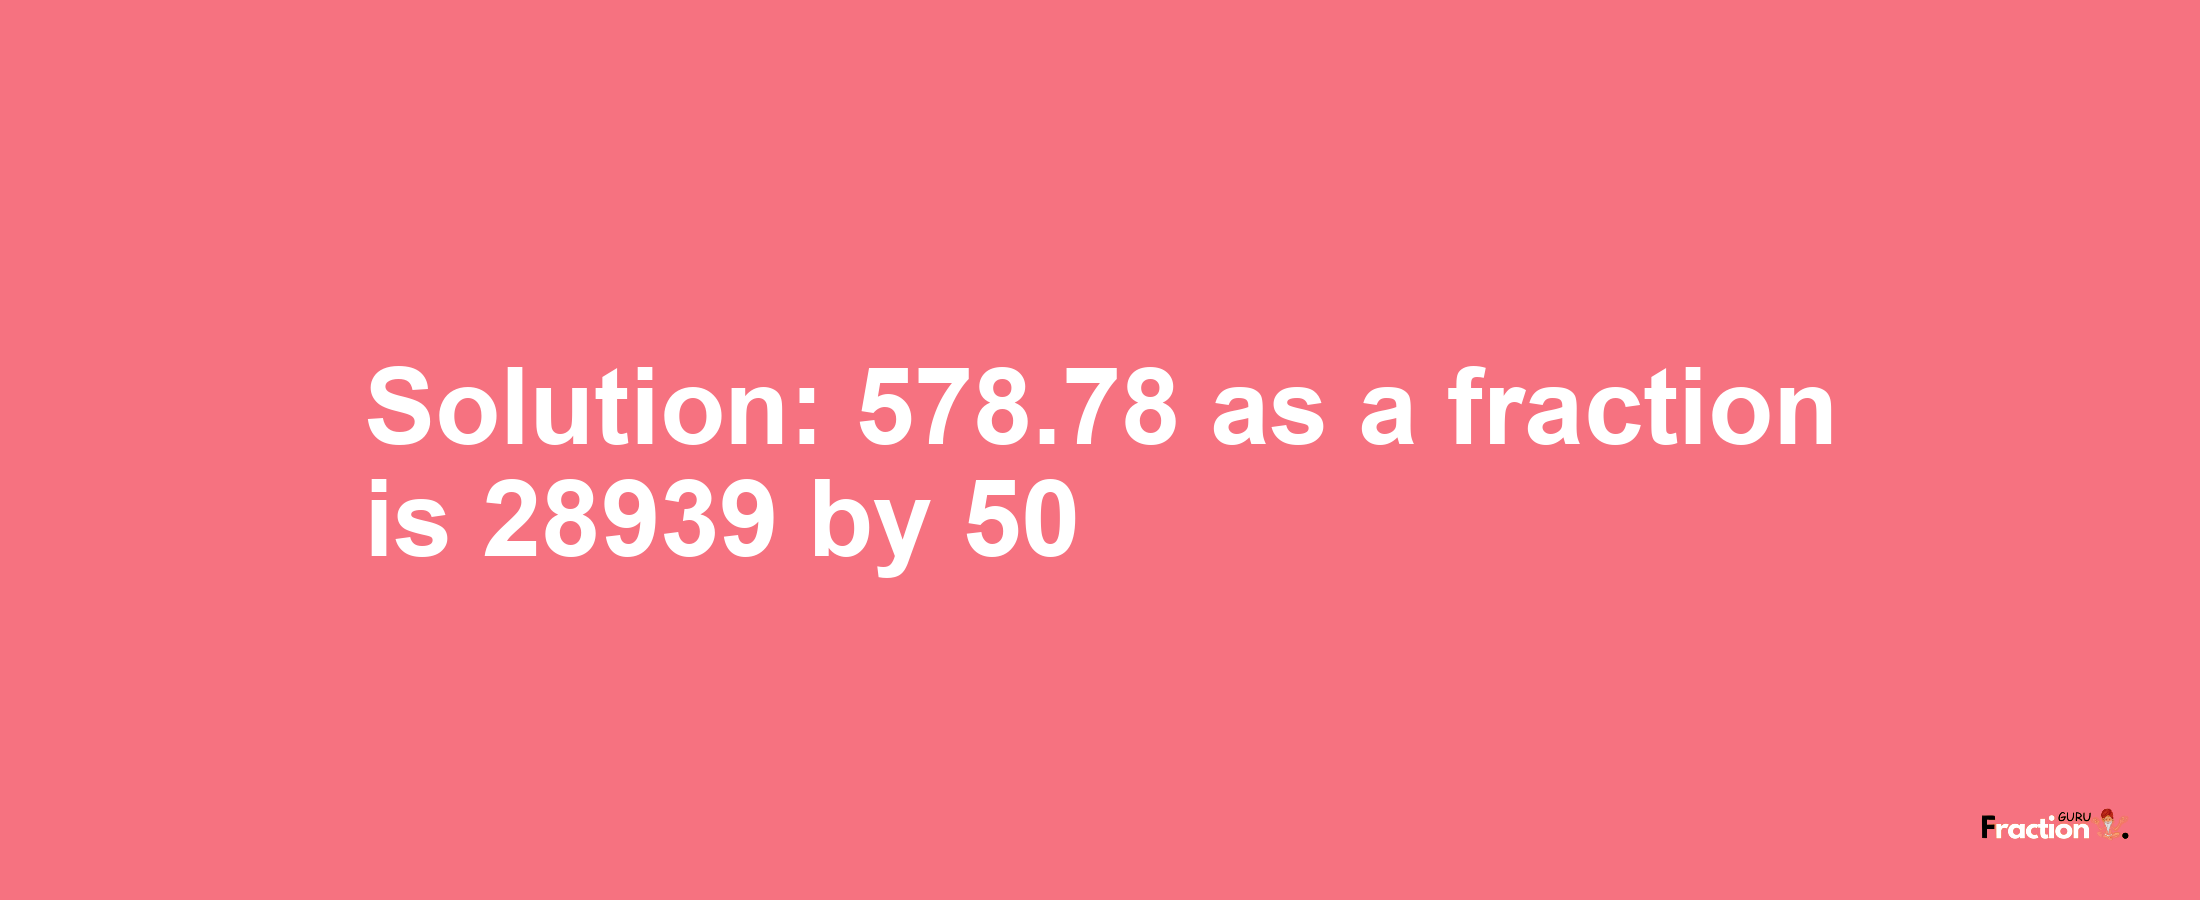 Solution:578.78 as a fraction is 28939/50